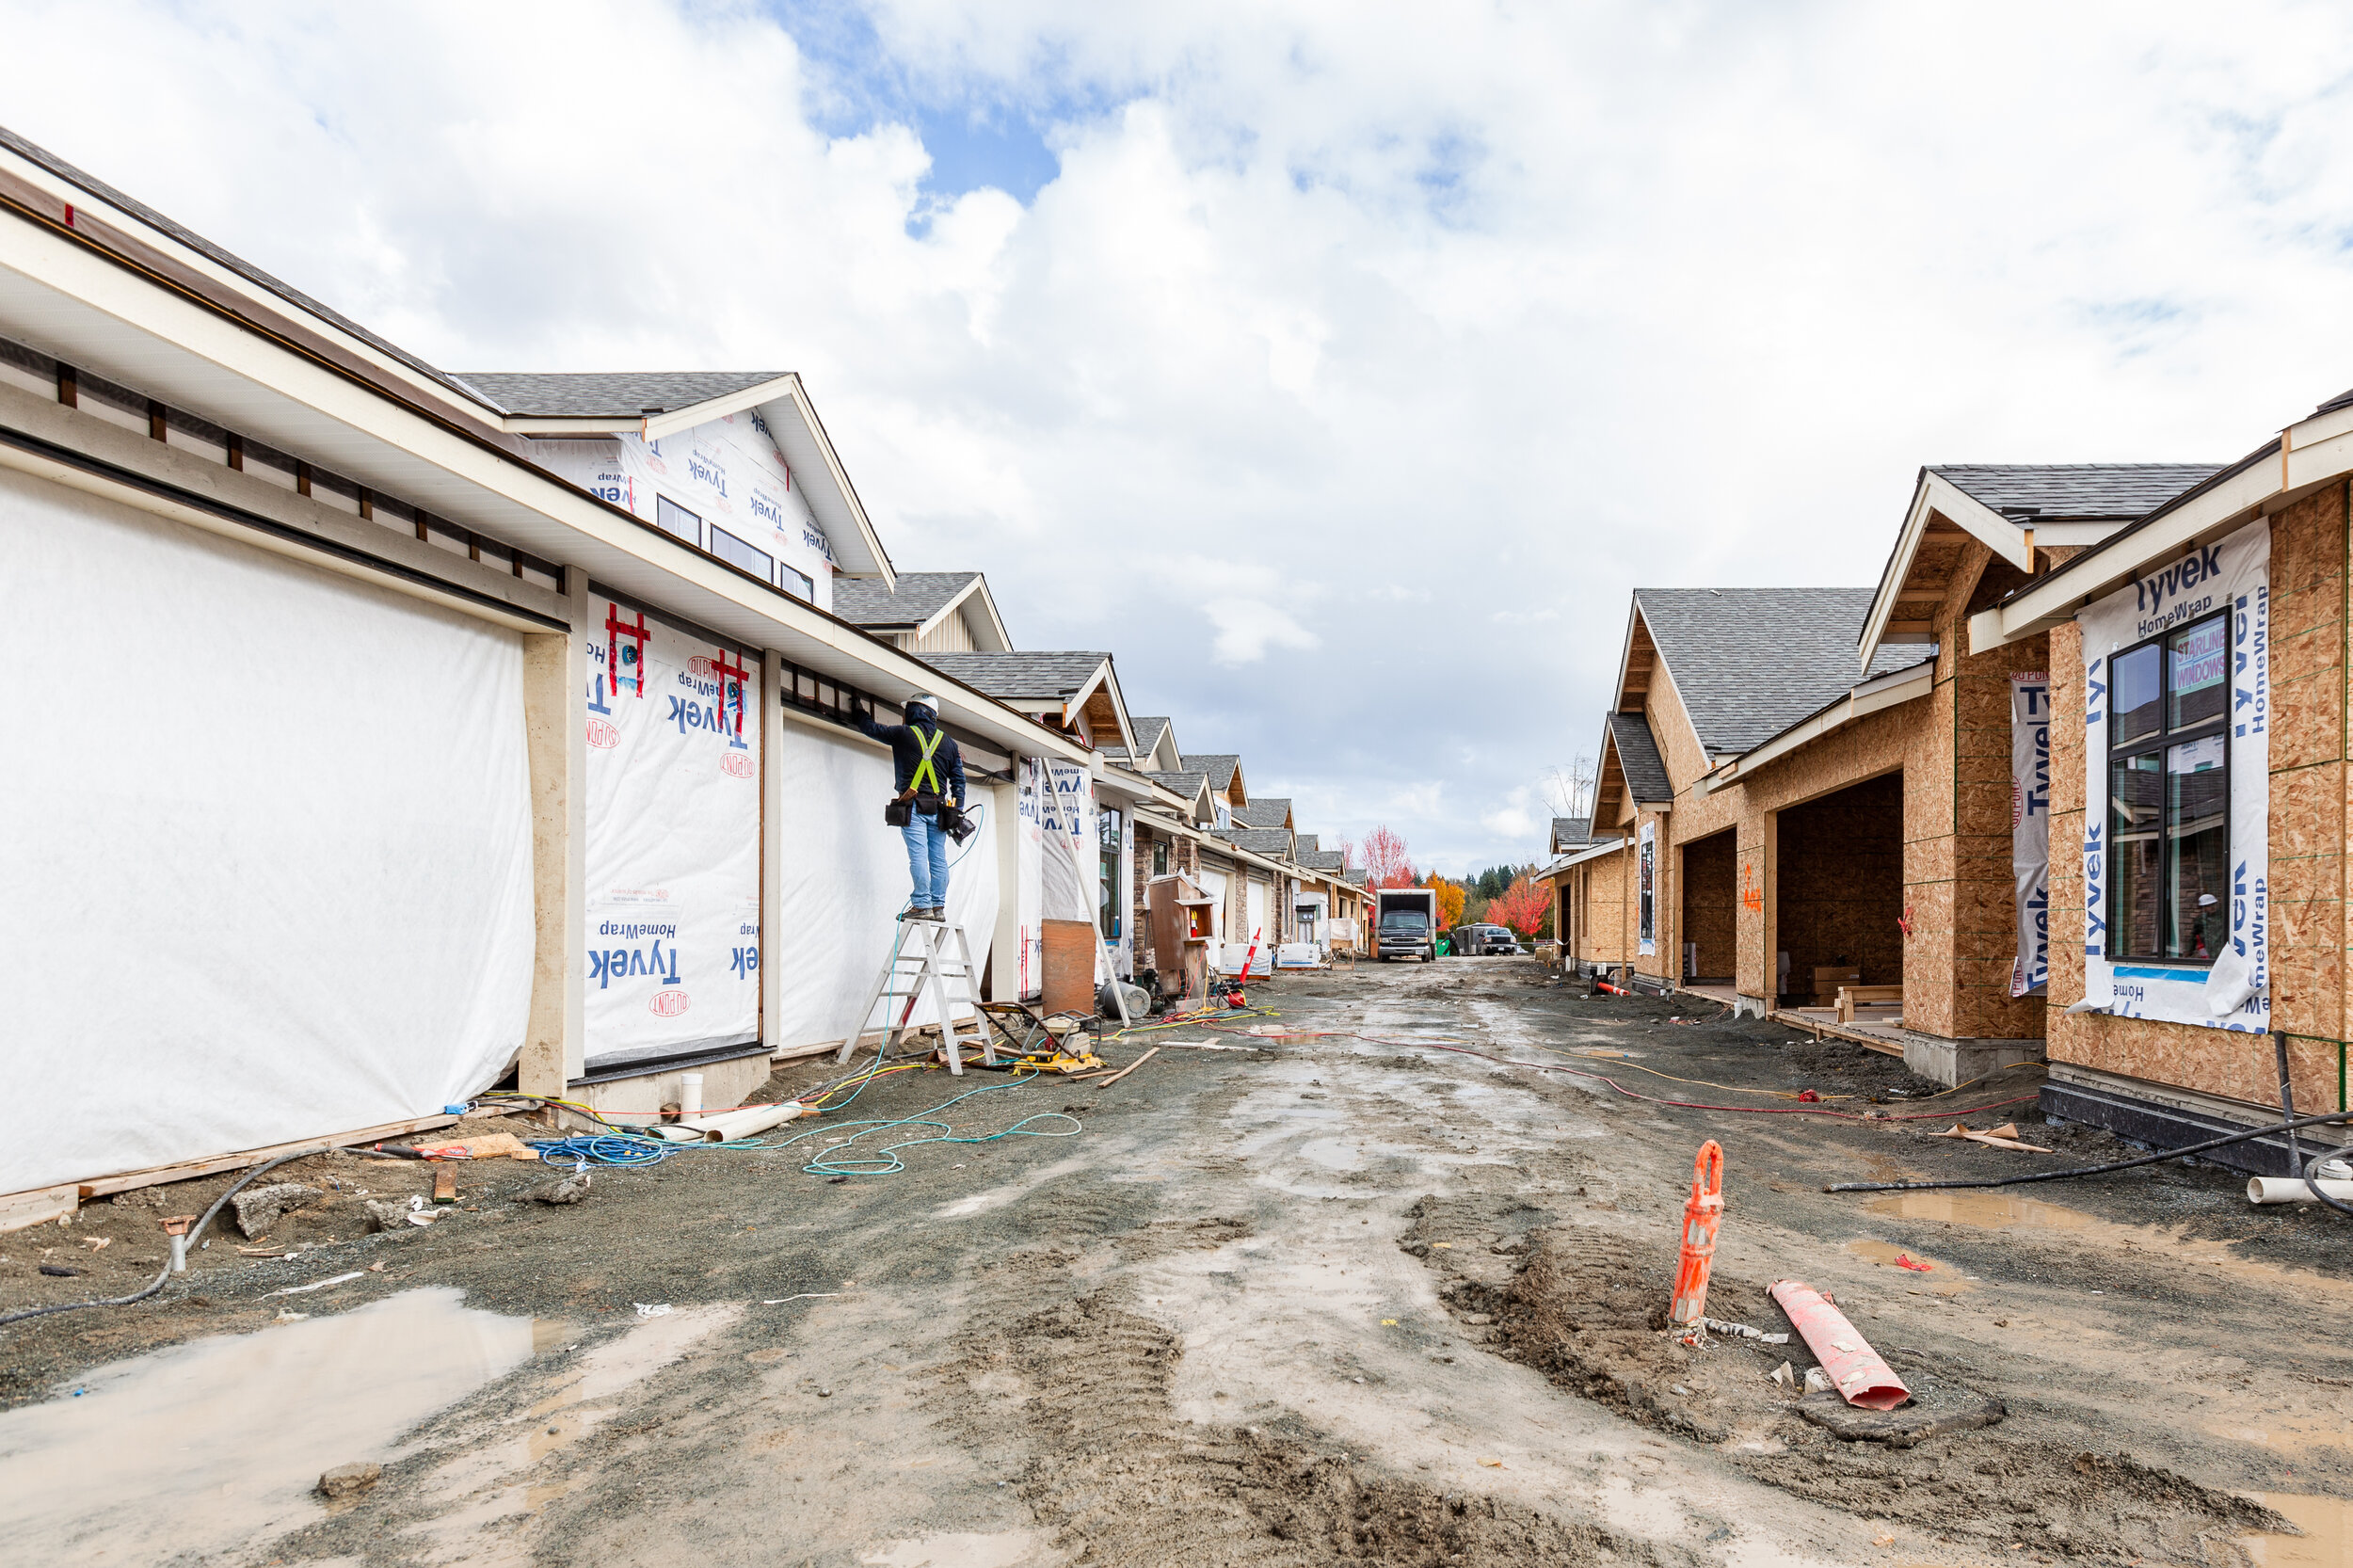 Denby Townhomes in Murrayville by Sandhill Development, a partner of Maclean Bros. Drywall